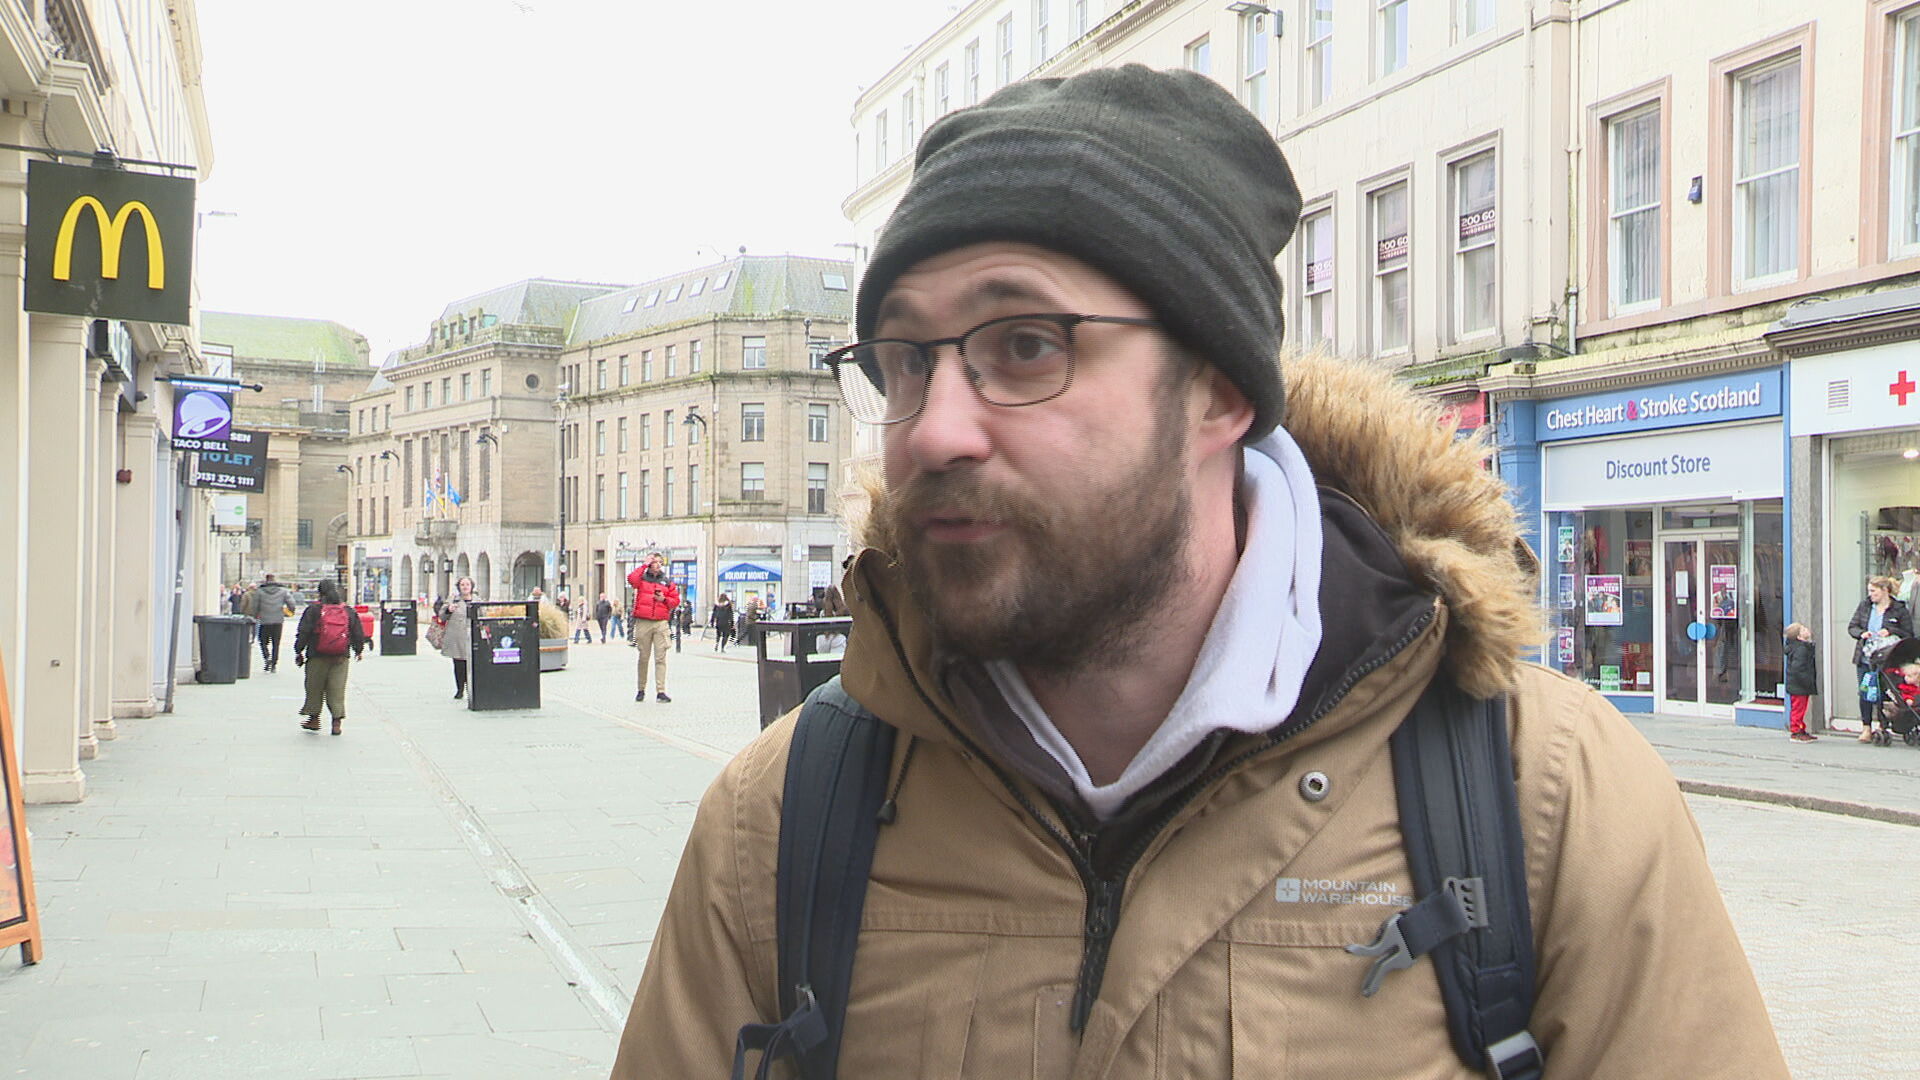 Richie Roncerno has been sleeping rough in eight cities across the UK for Steps To Hope